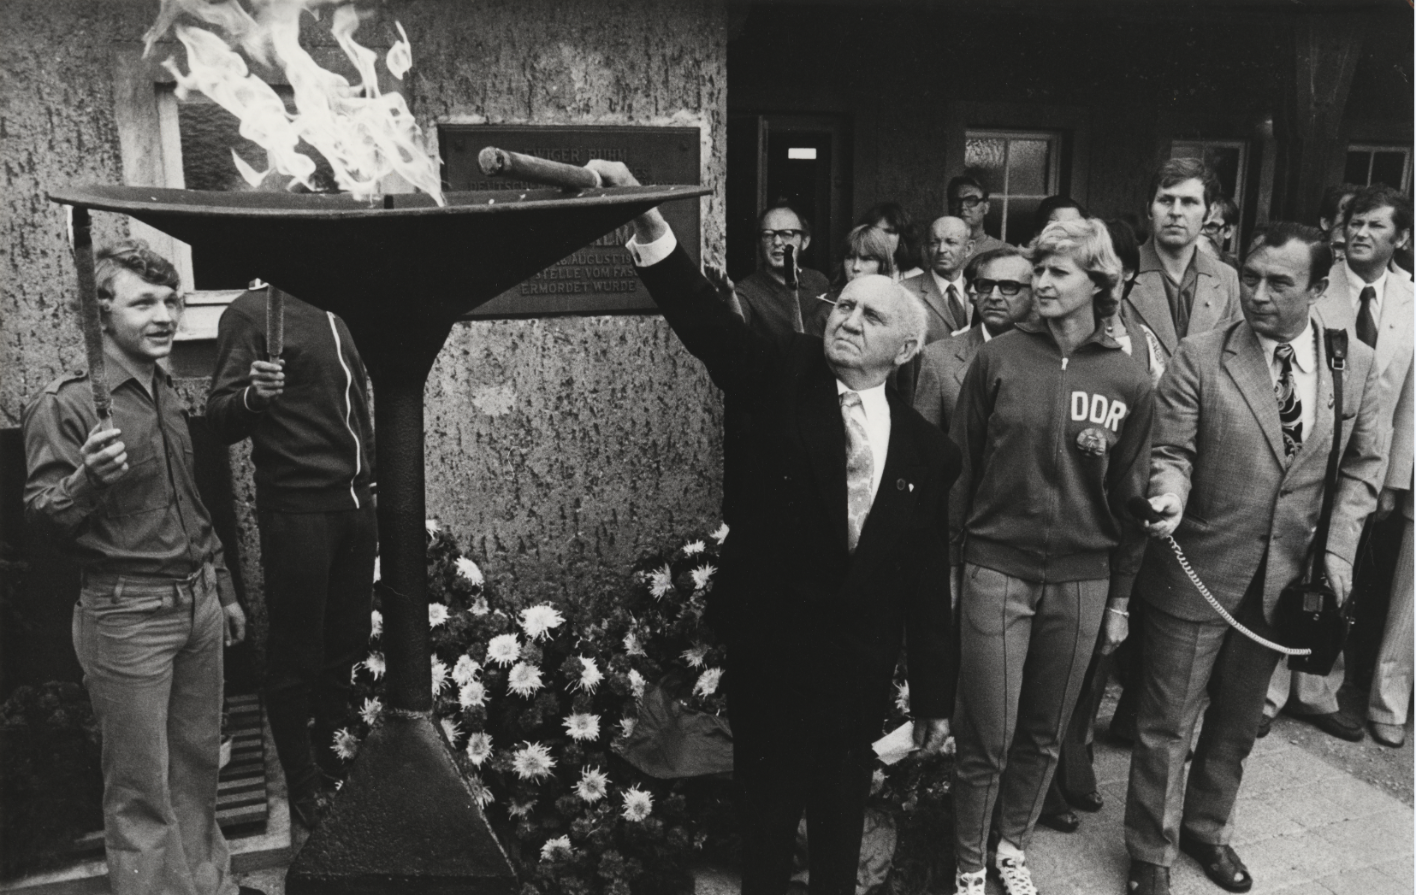 A fire bowl can be seen in front of the Ernst Thälmann memorial plaque, which is being lit by an older man in a black suit. Another man is holding a microphone for him. Behind him are other participants in the event. Two young people stand behind the fire bowl and hold torches. 